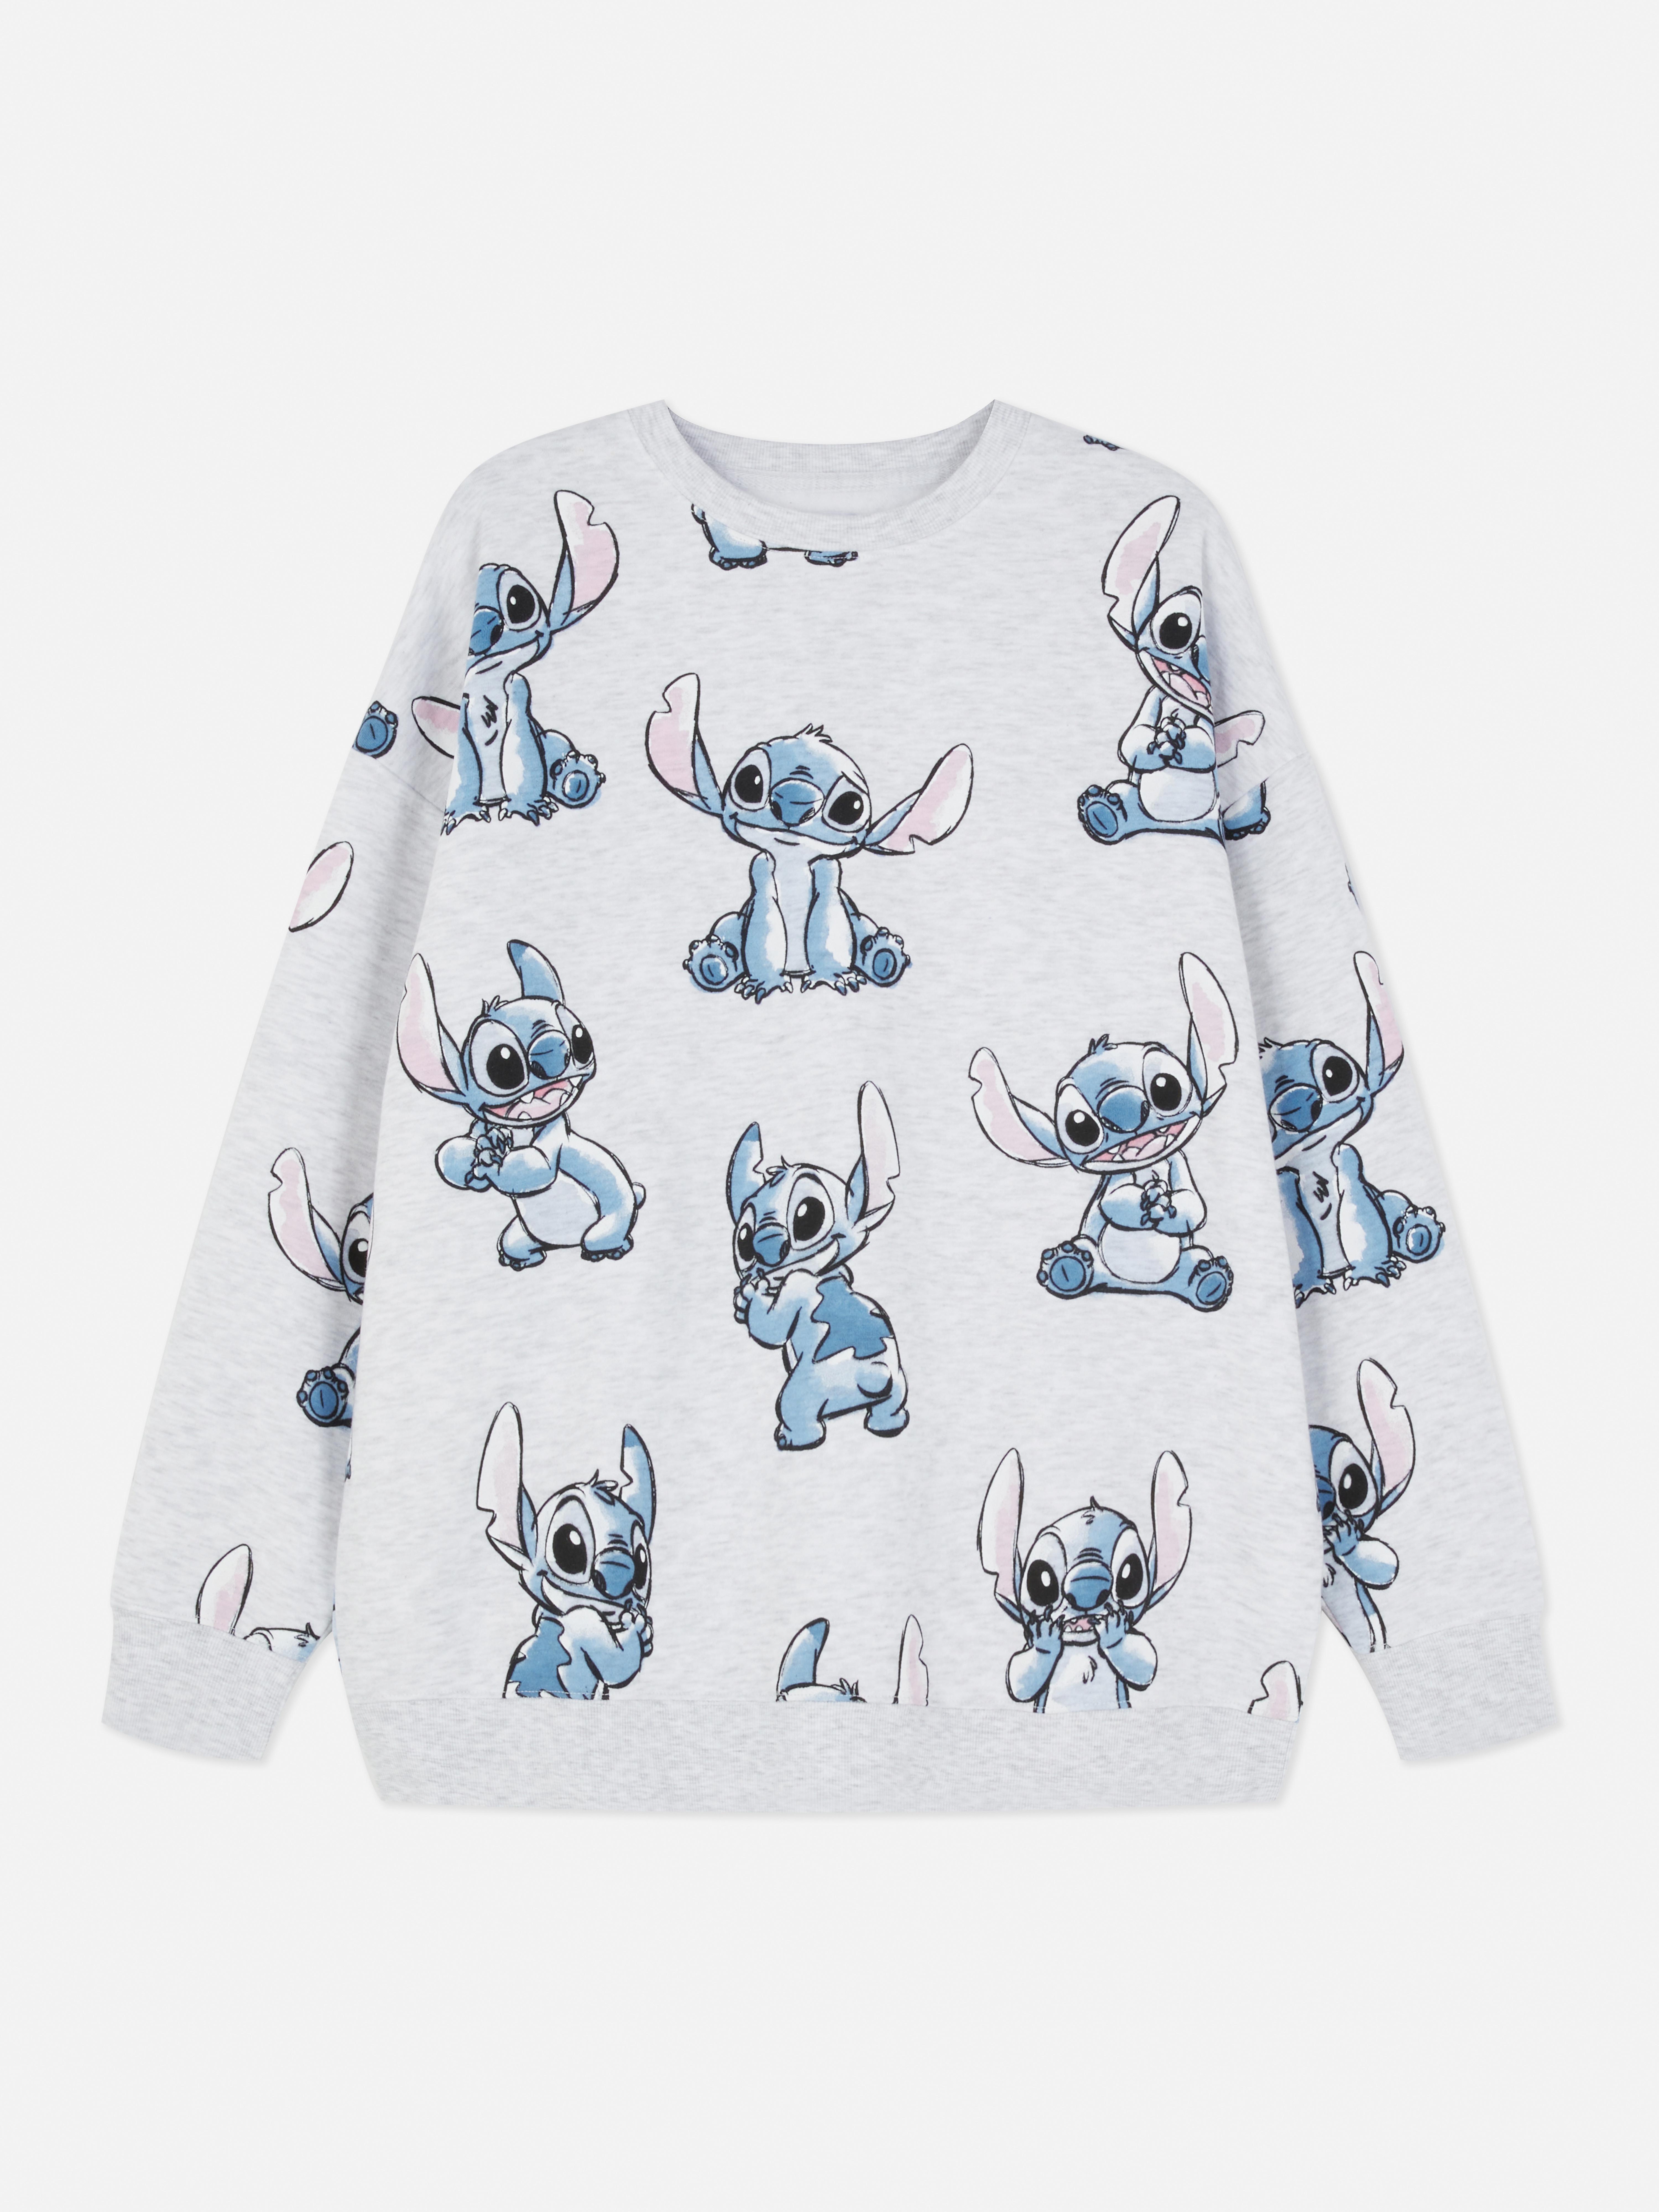 Lilo Stitch Sweatshirt | Women's Sweaters &amp; Sweatshirts | Women Sweaters | Women's Style | Our Womenswear Collections | All Primark Products | Primark